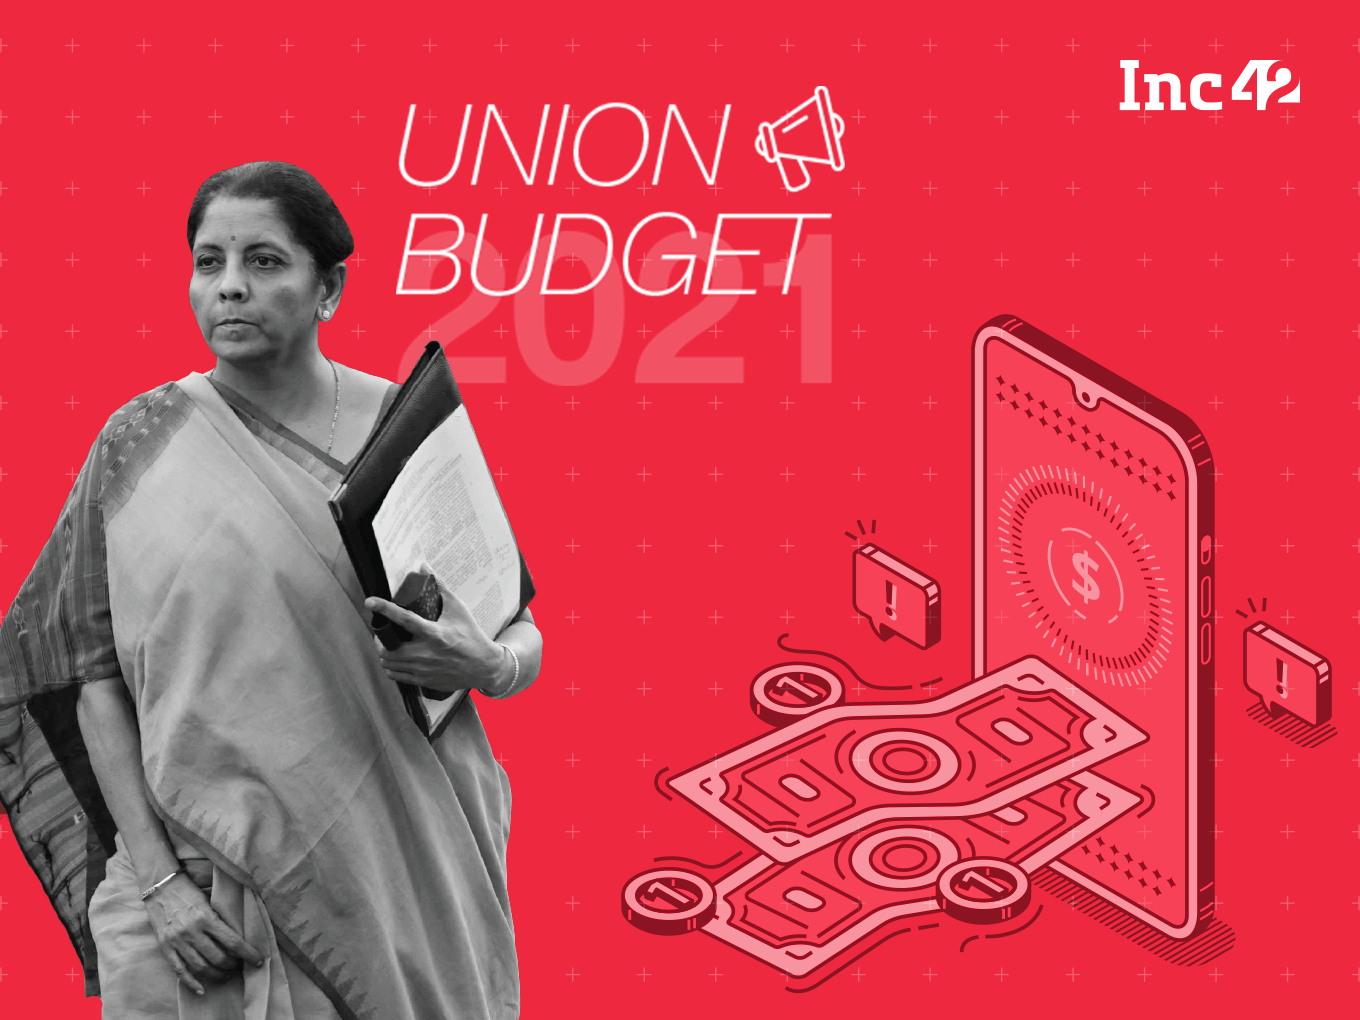 Better Liquidity, Institutional Framework And More: Here’s What Lending Startups Expect FM To Address In Union Budget 2021